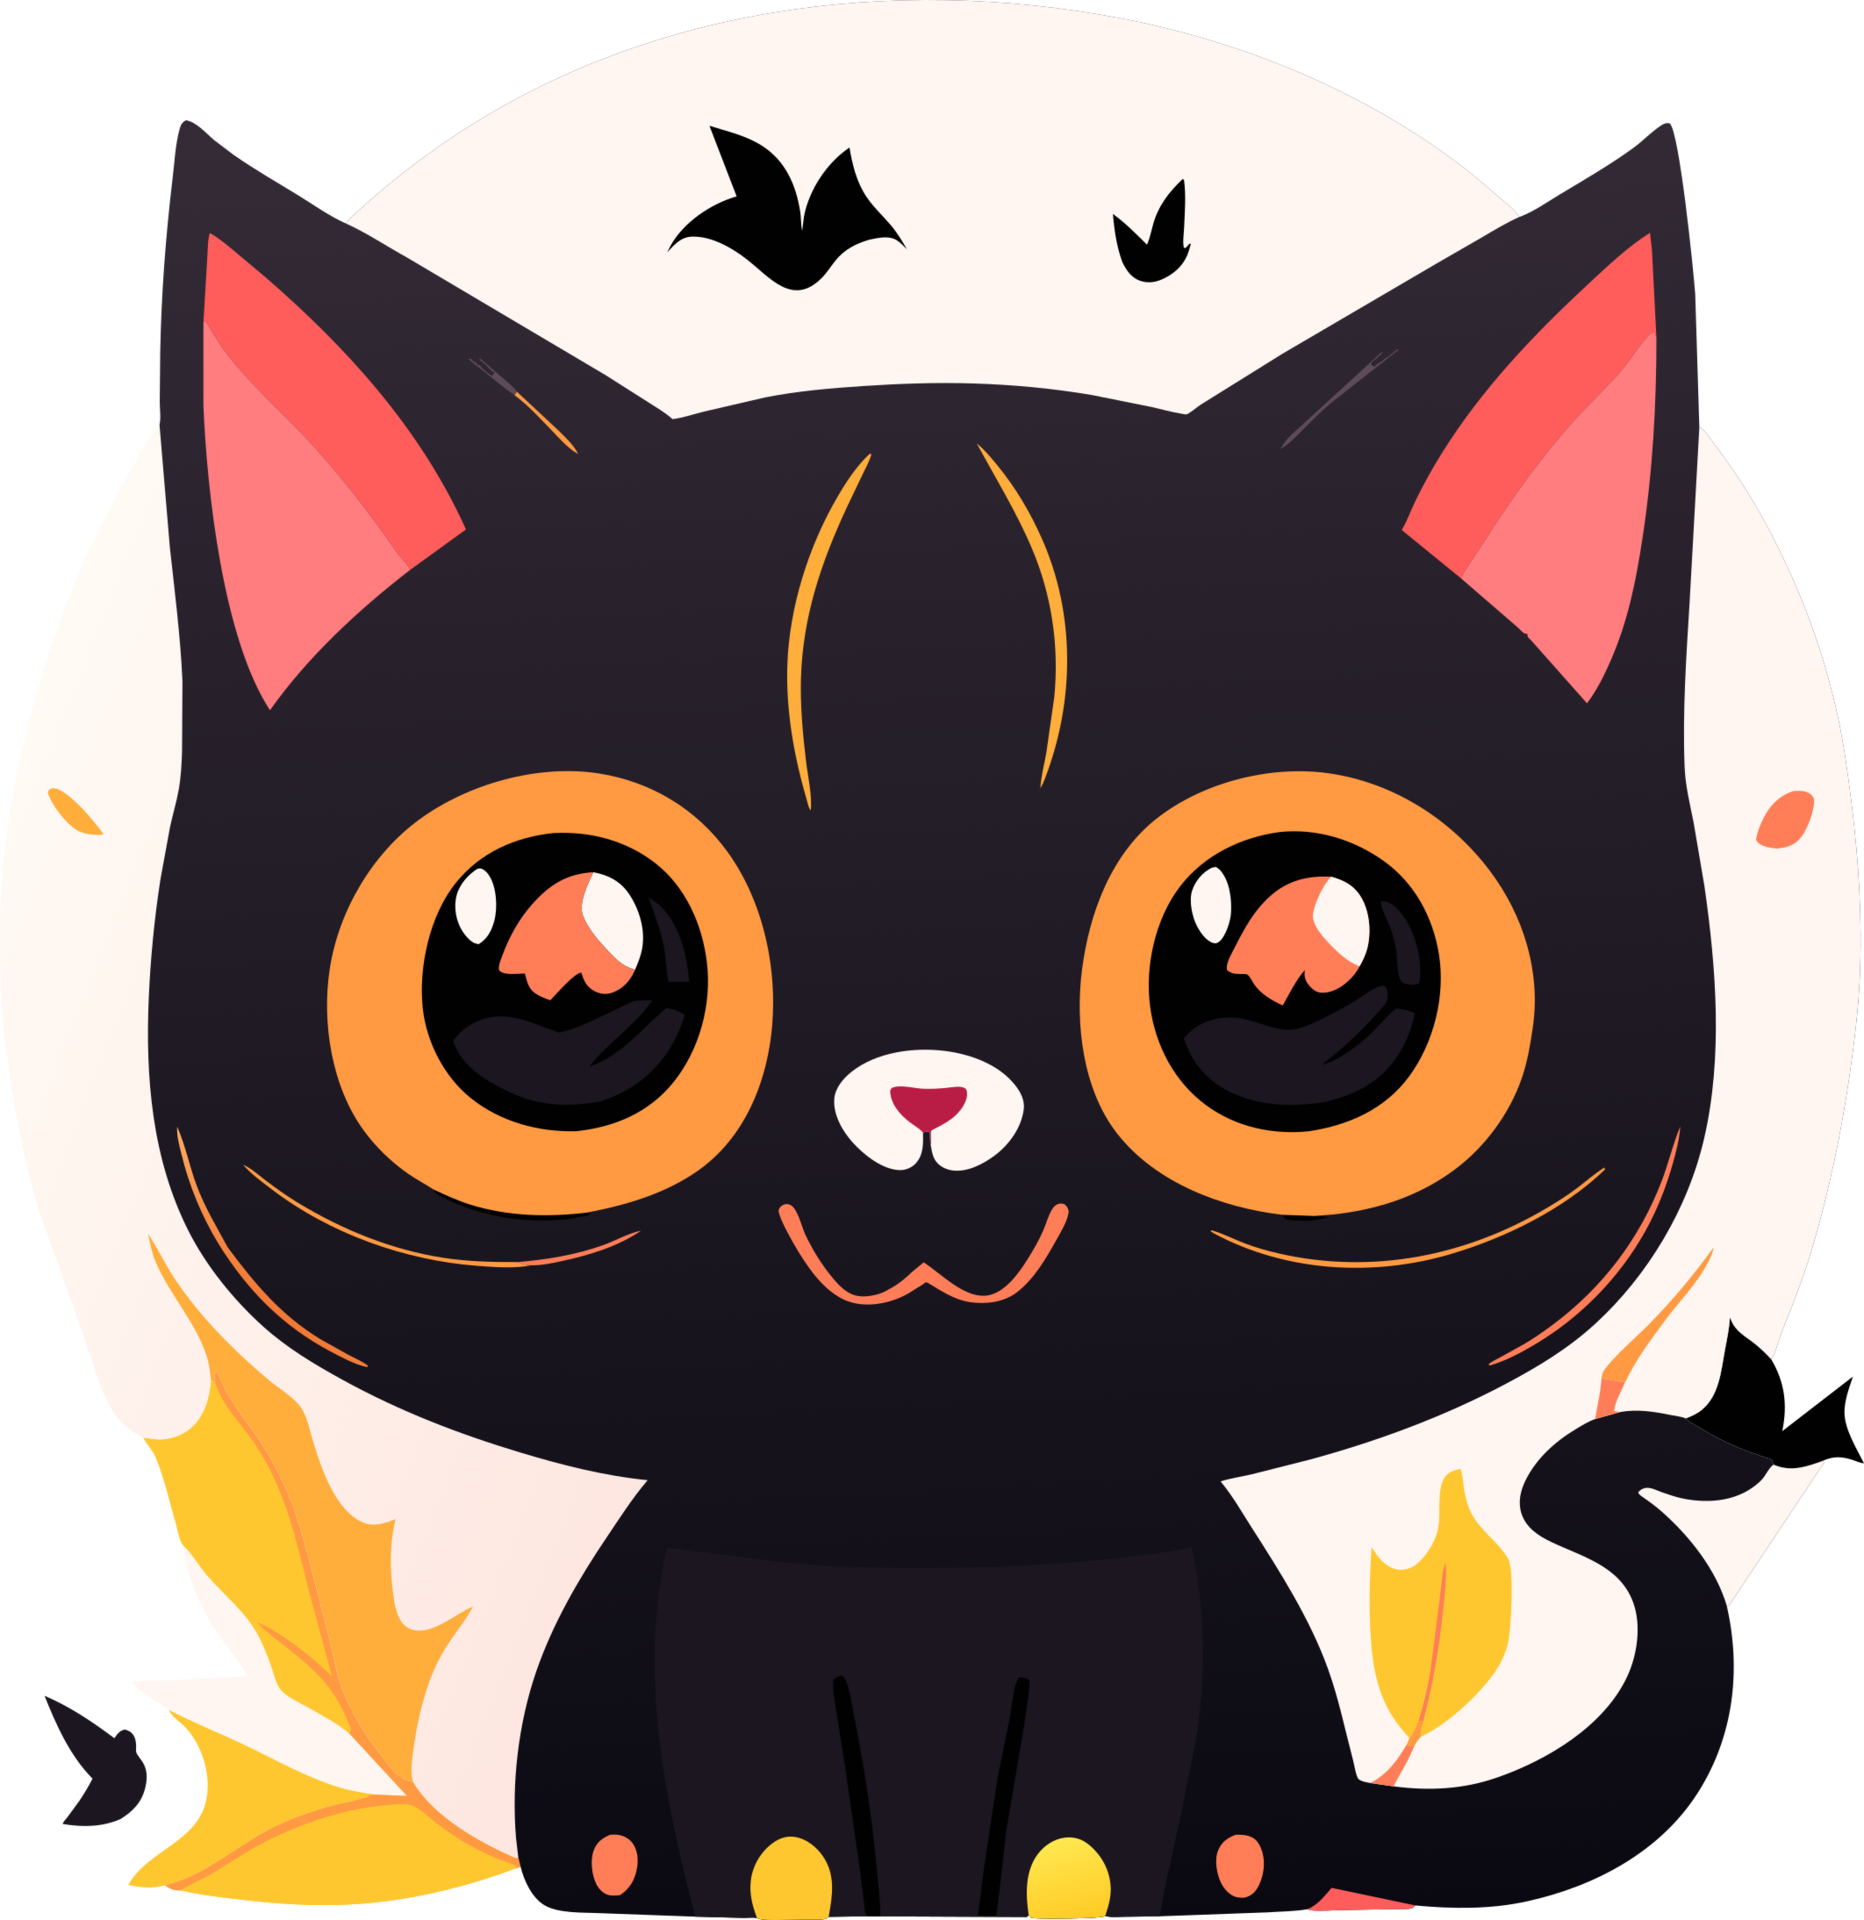 35,543 Cute Cat Icons - Free in SVG, PNG, ICO - IconScout